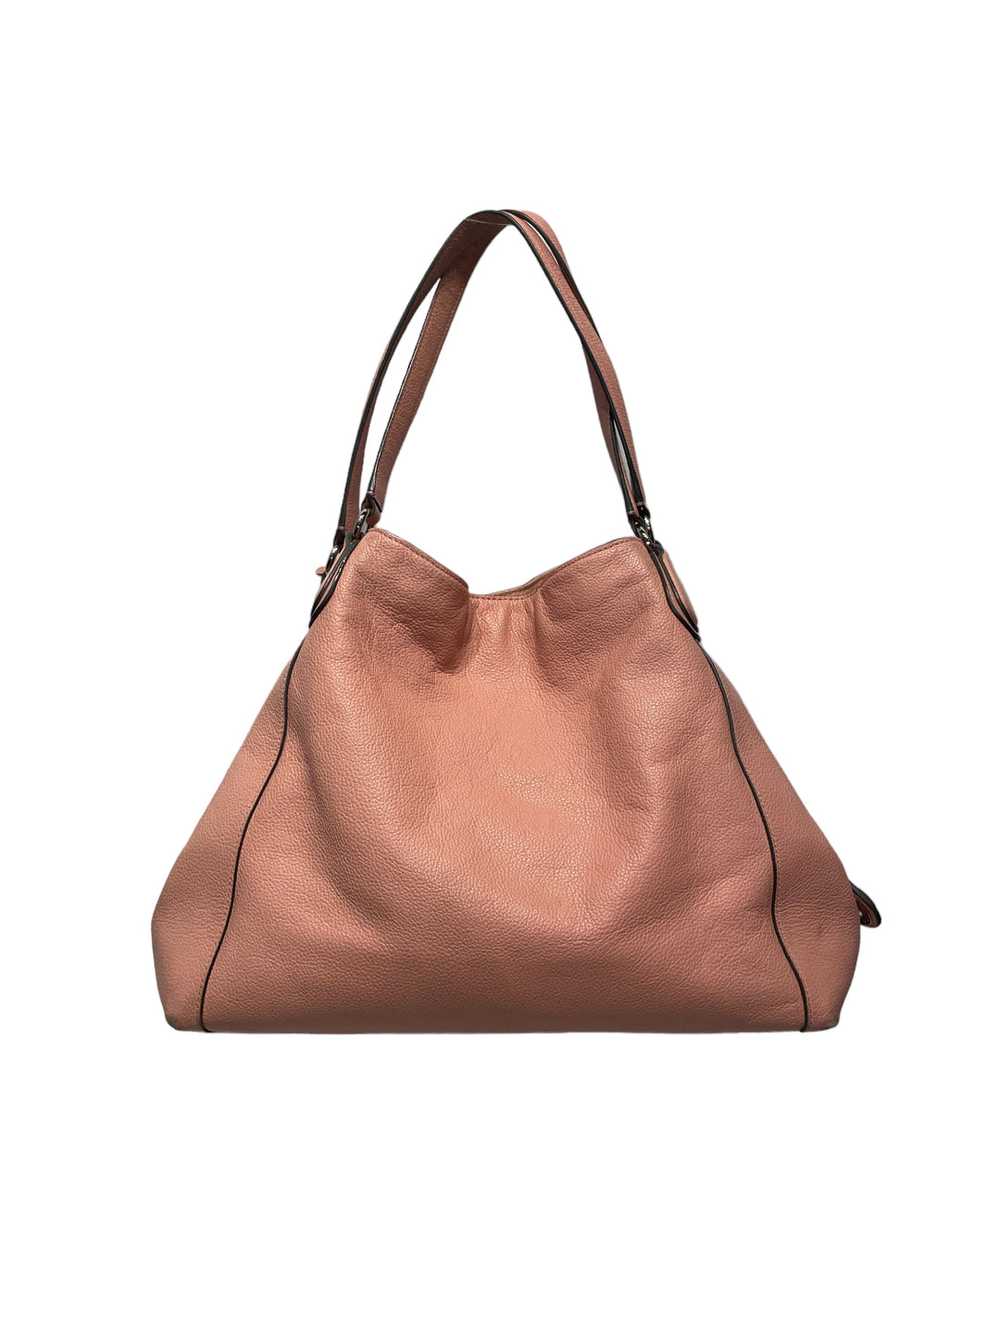 COACH/Tote Bag/Leather/PNK/ - image 2